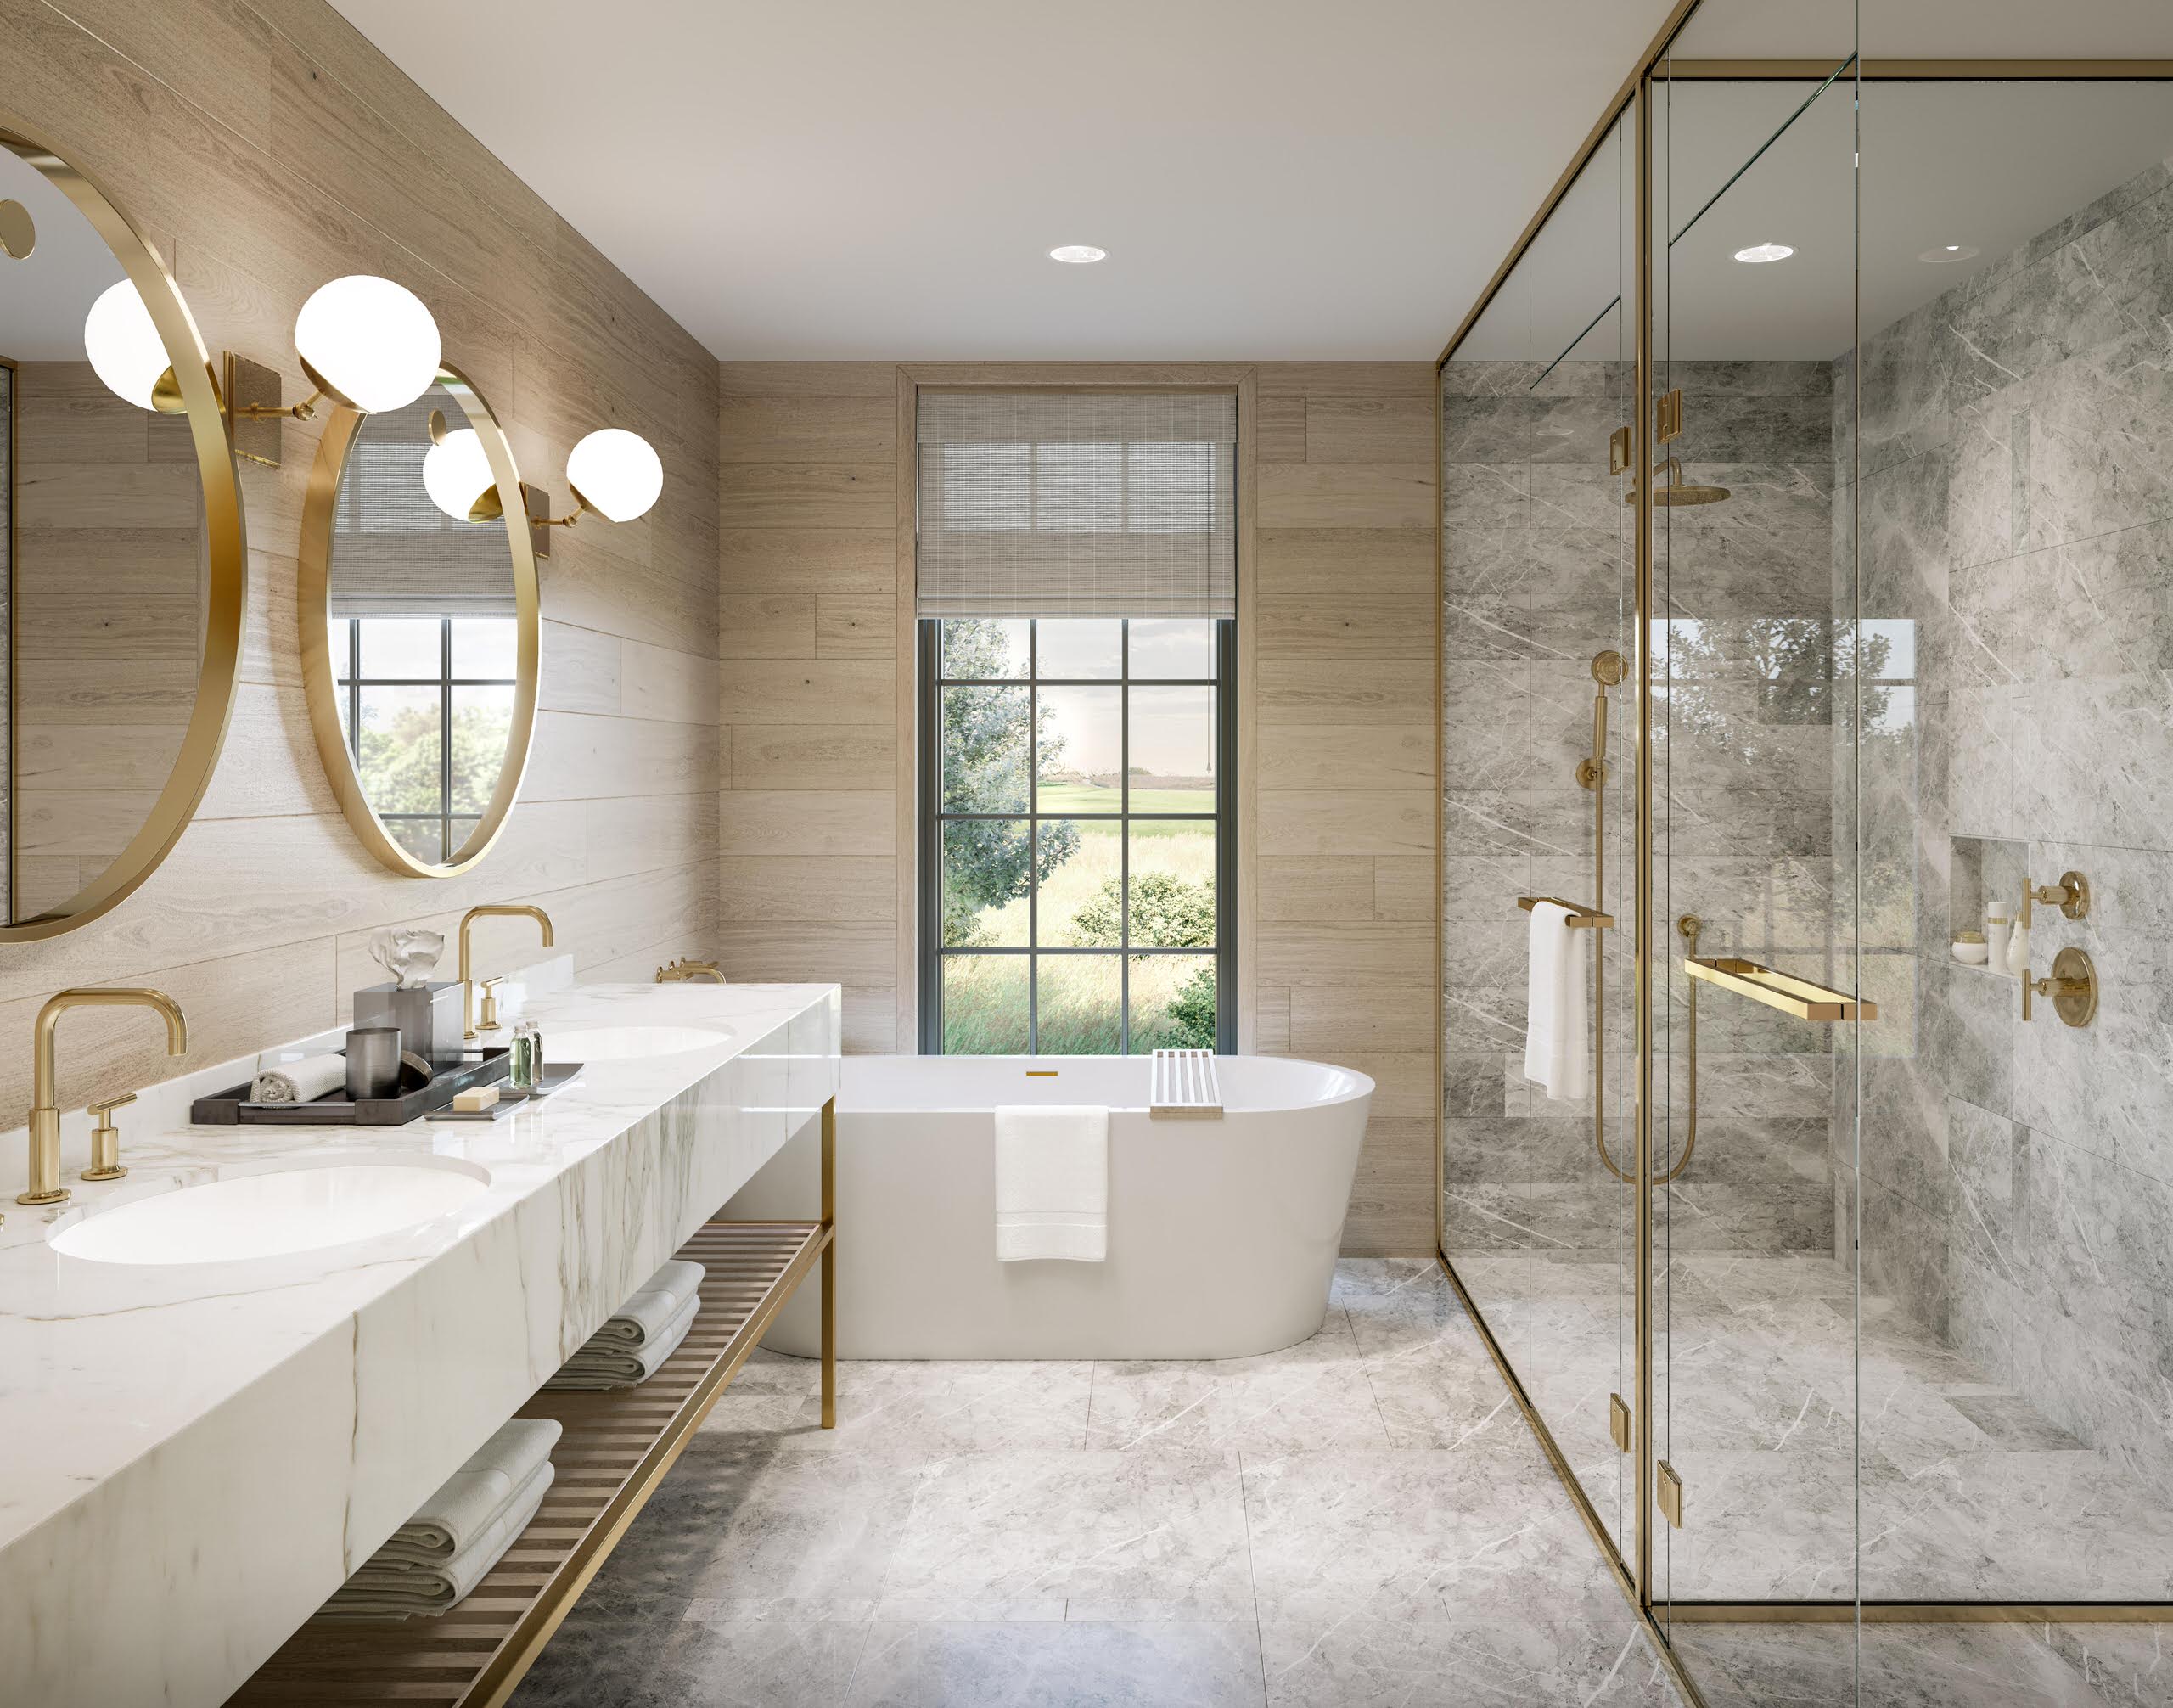 A spa-inspired bathroom at the new Cabot Cliffs luxury residences. We used all gold hardware set against a light cedar wood wall with stone marbling throughout. The result is a perfect mic of understa